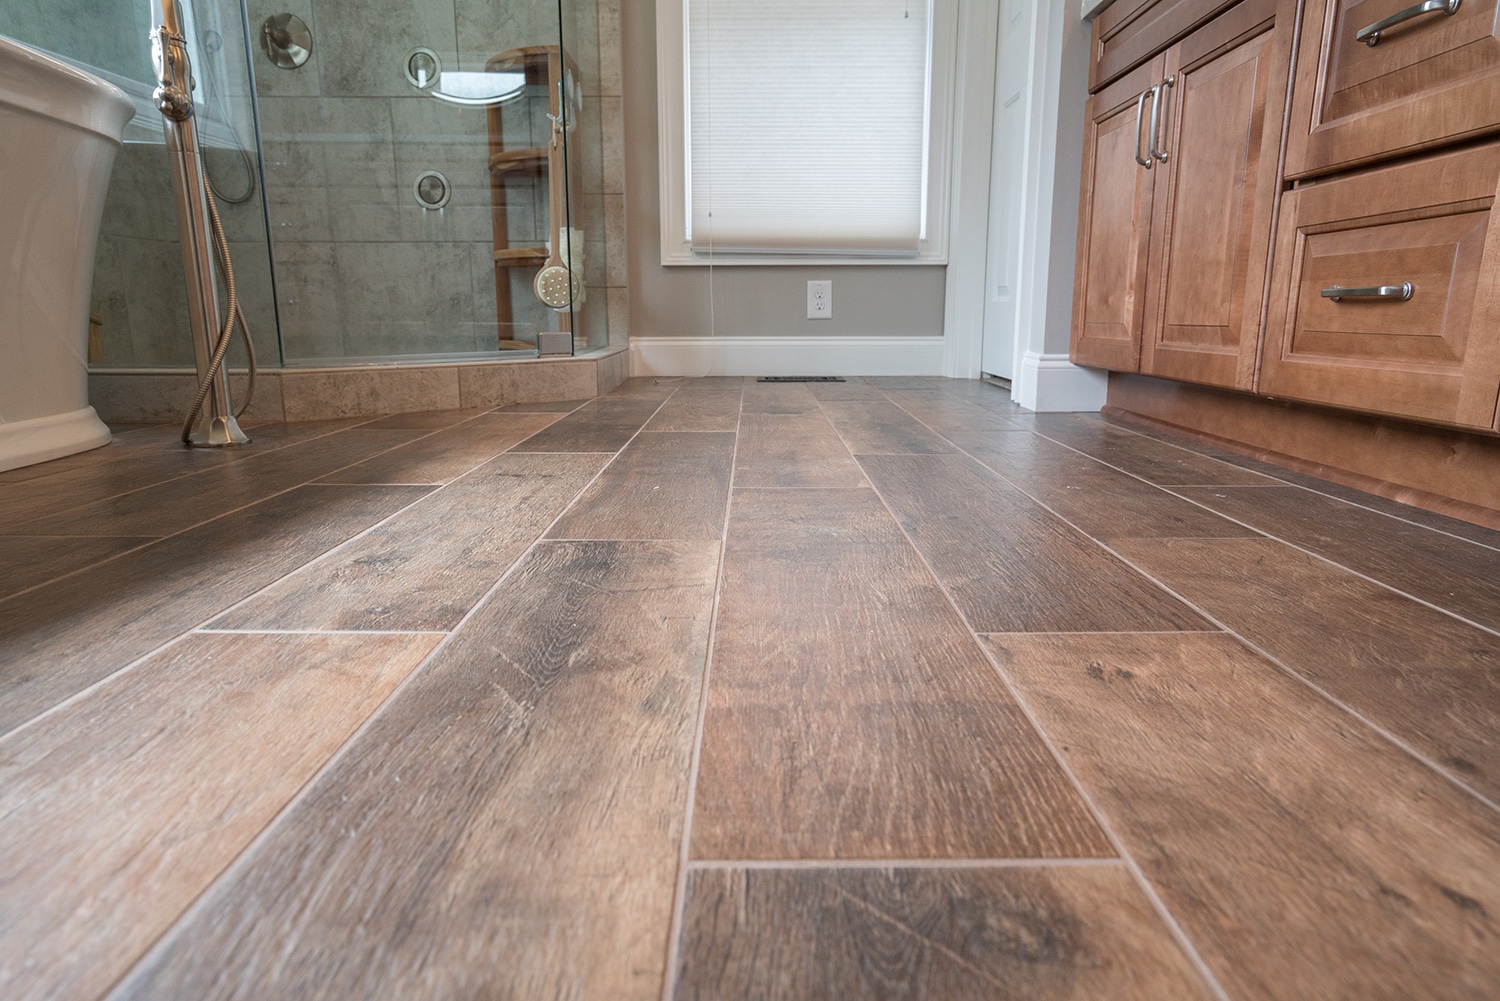 Pros And Cons Of Tile Flooring Tracy, Porcelain Tile Pros And Cons